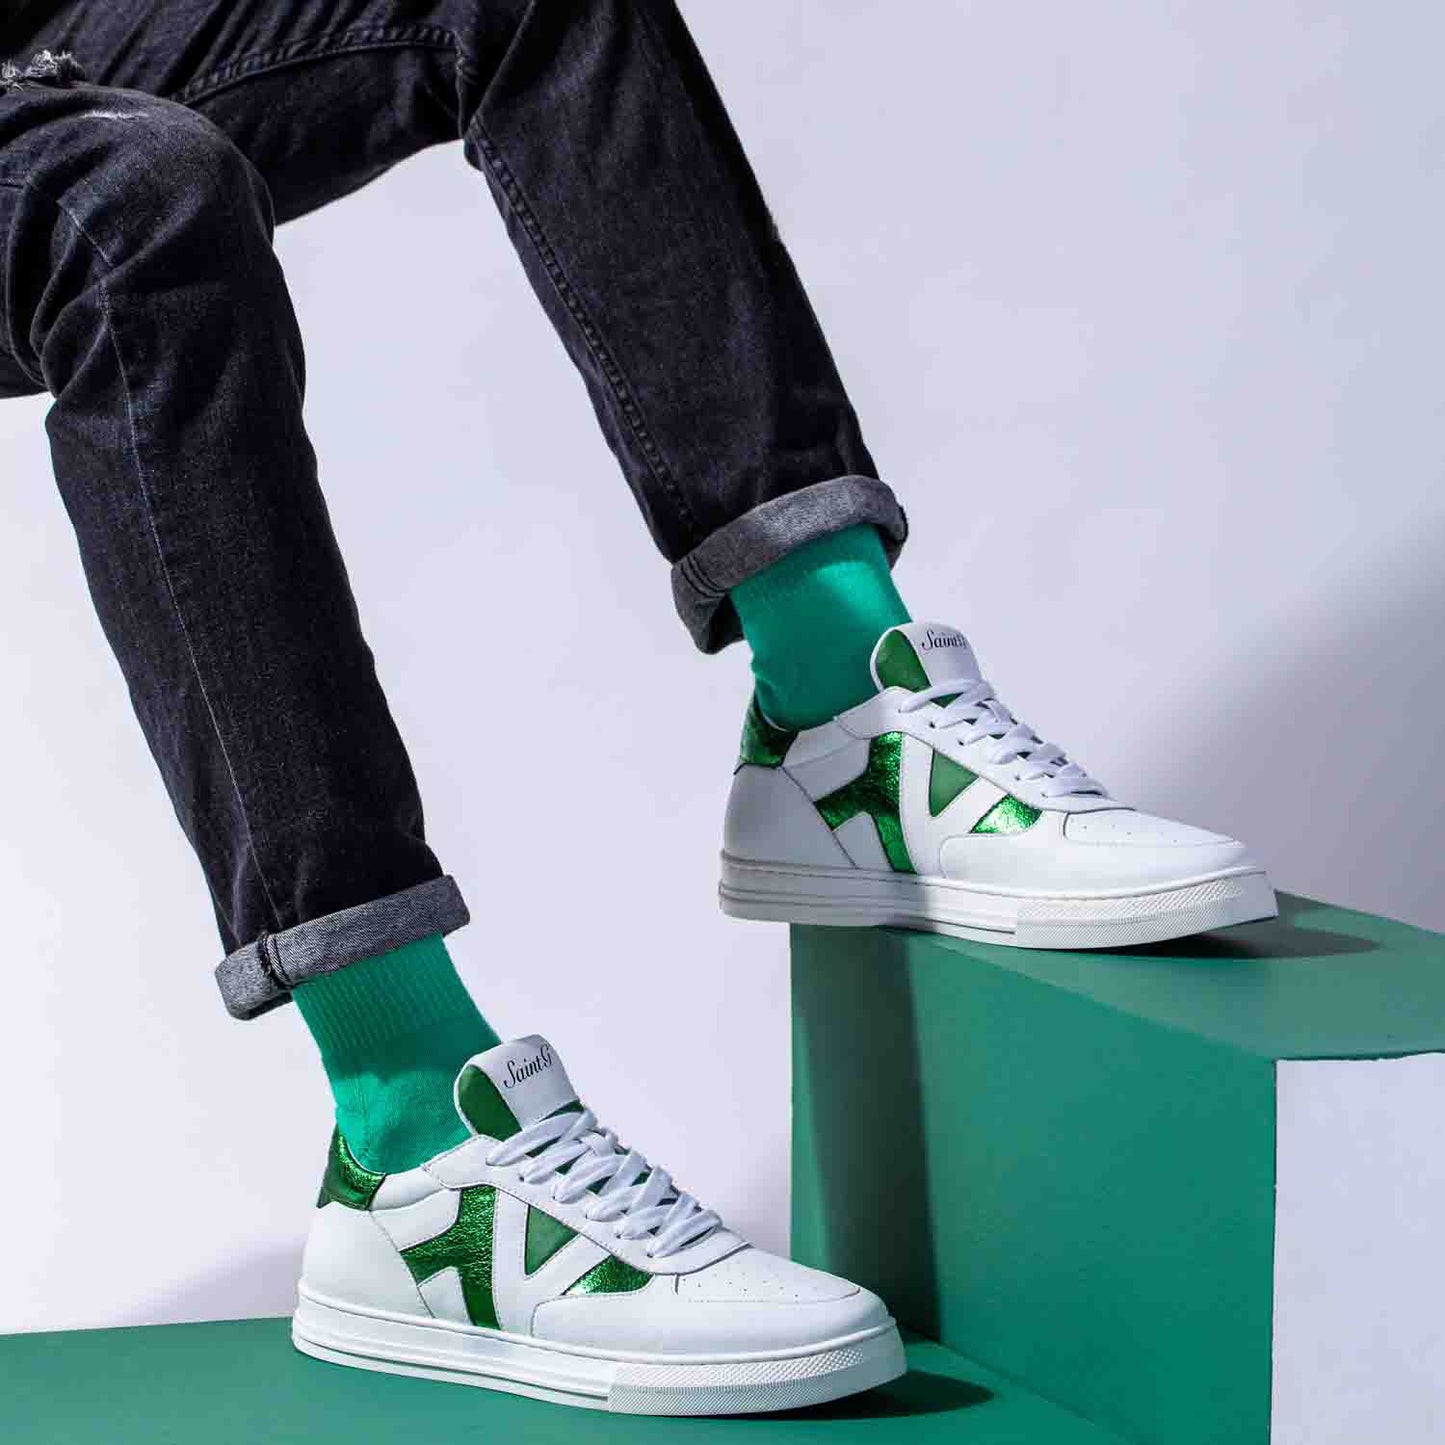 Whitesta Elliot White & Green Leather Handcrafted Sneakers